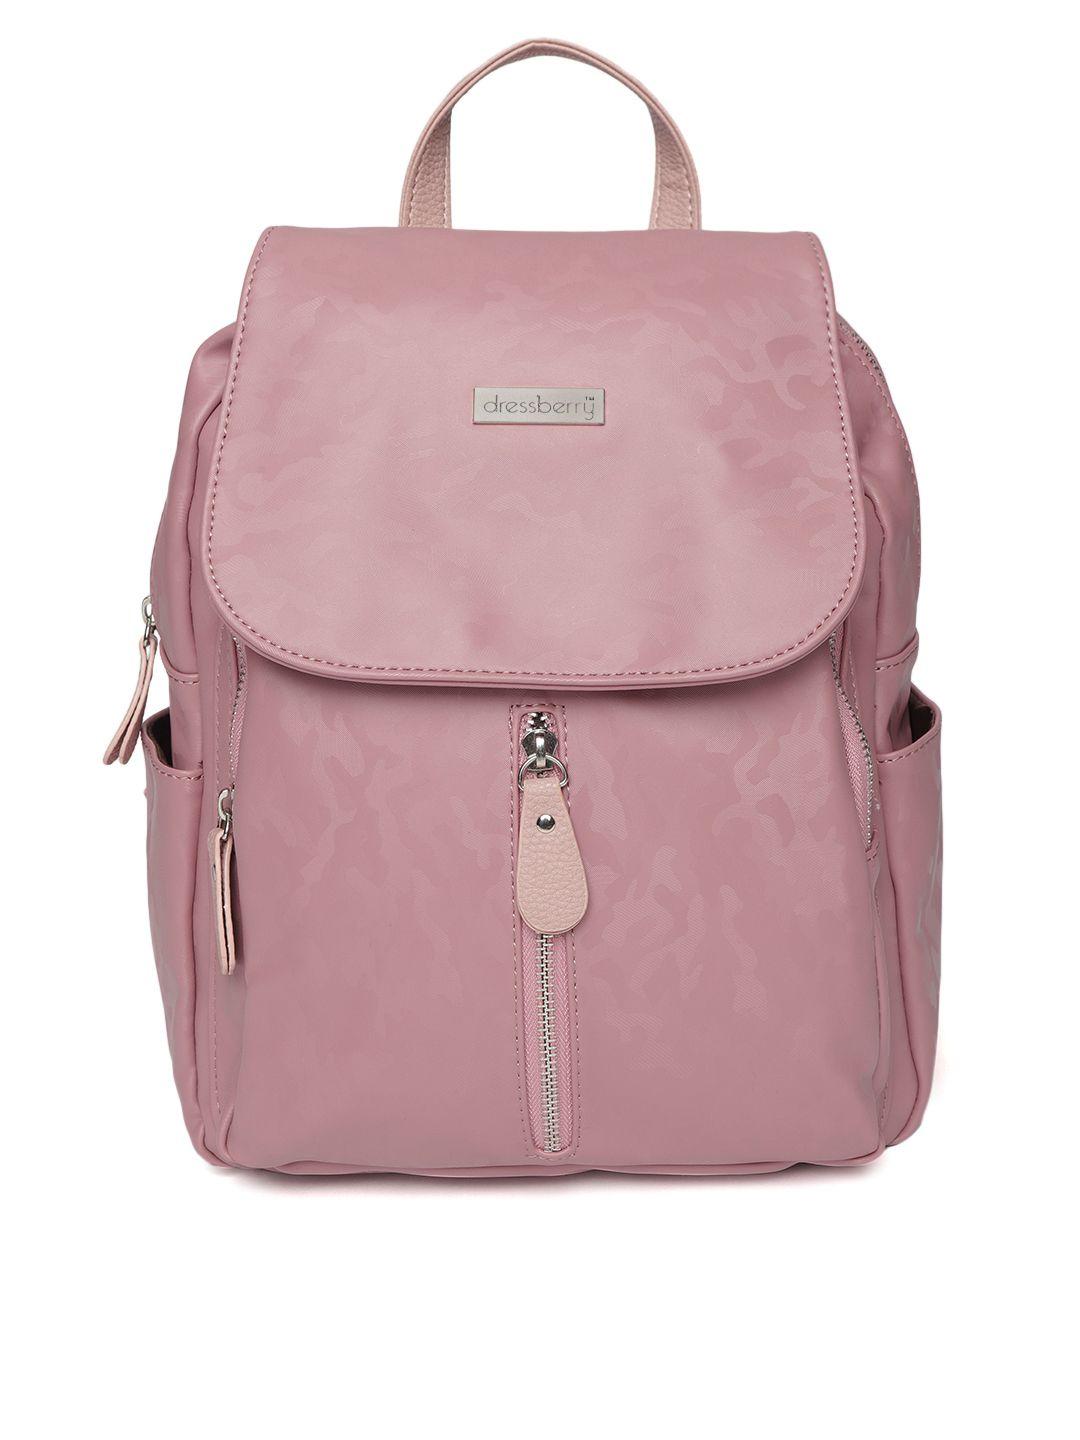 dressberry-women-pink-camouflage-textured-backpack